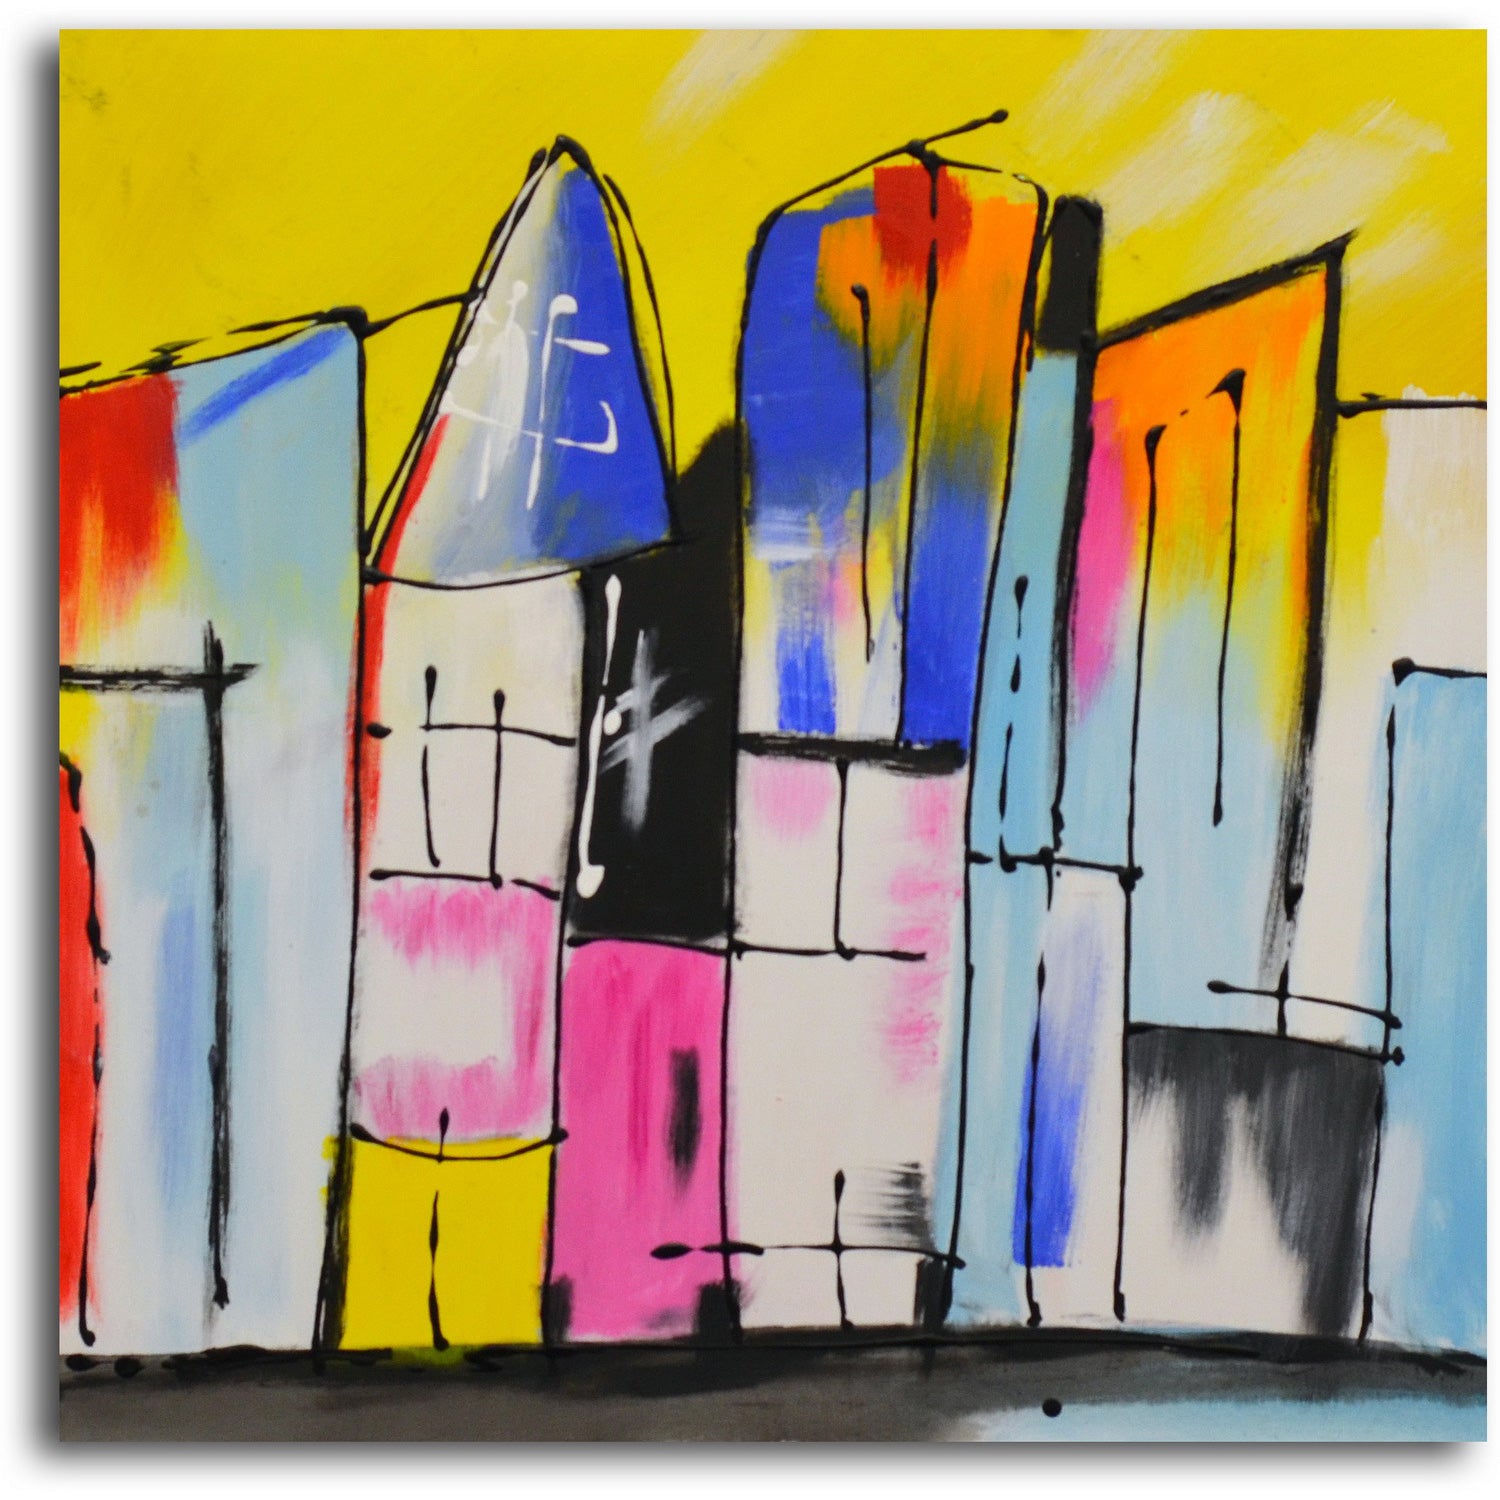 "House of a Different Color" Original painting on canvas - Set of 2